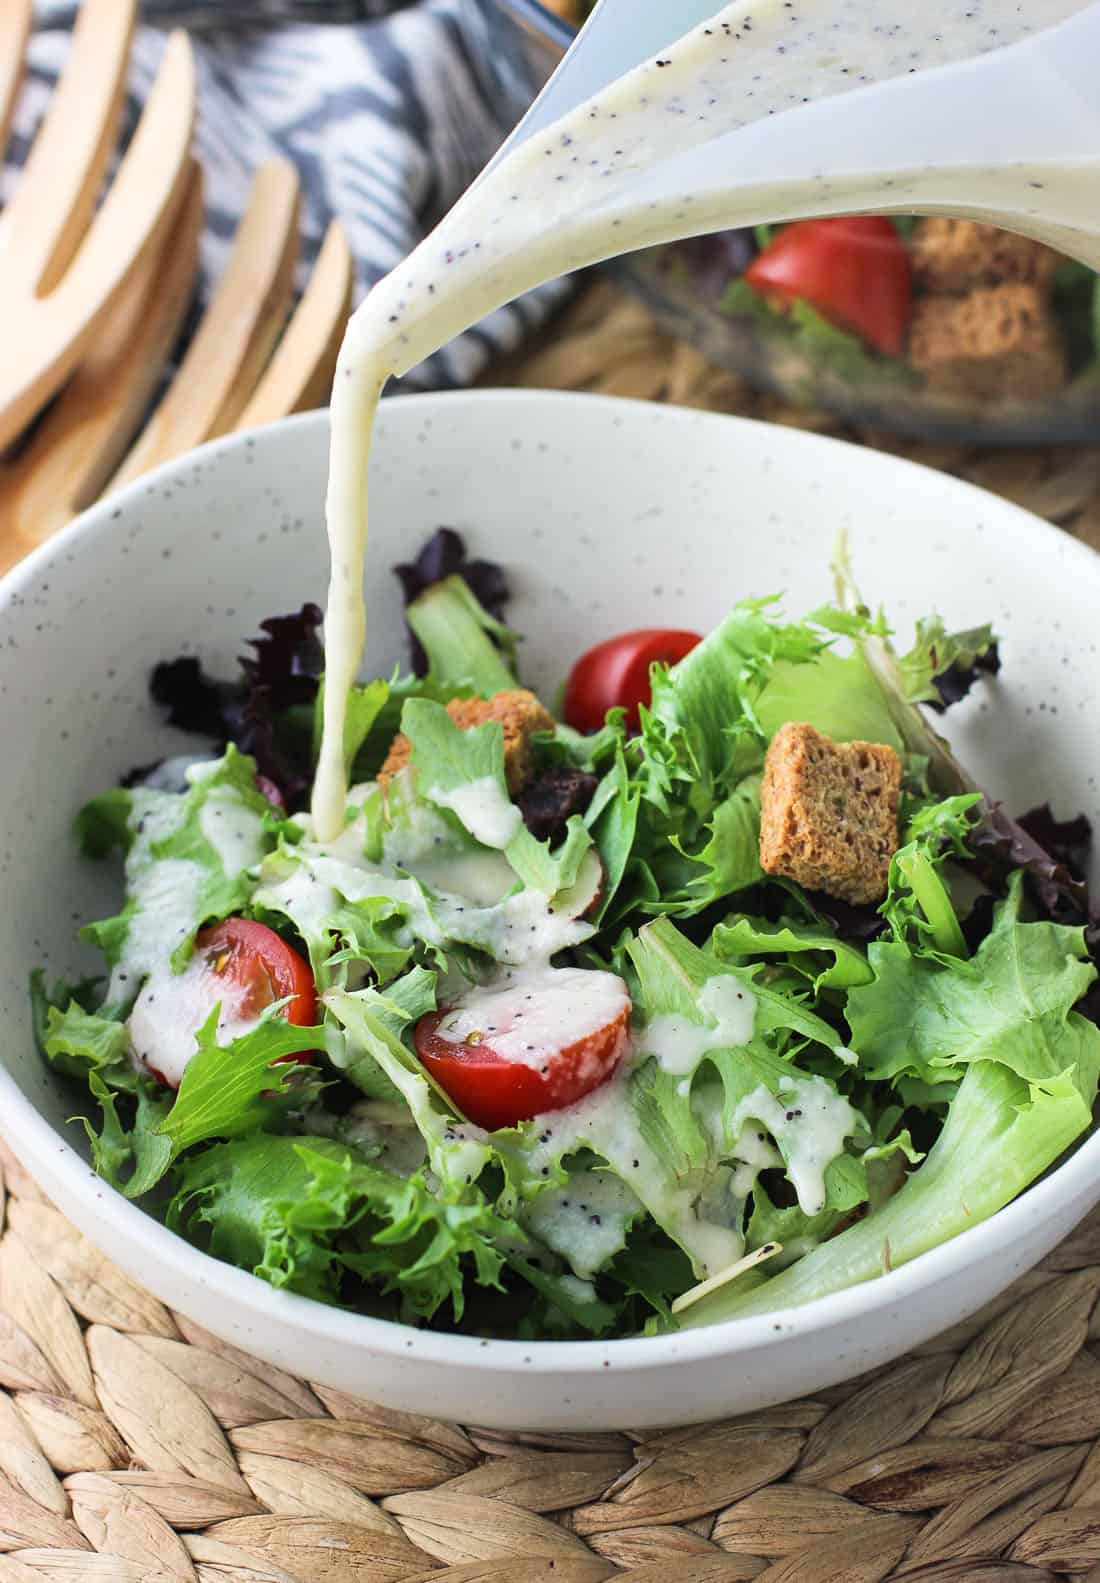 Dressing being poured over a shallow bowl of salad consisting of mixed greens, cherry tomatoes, and croutons